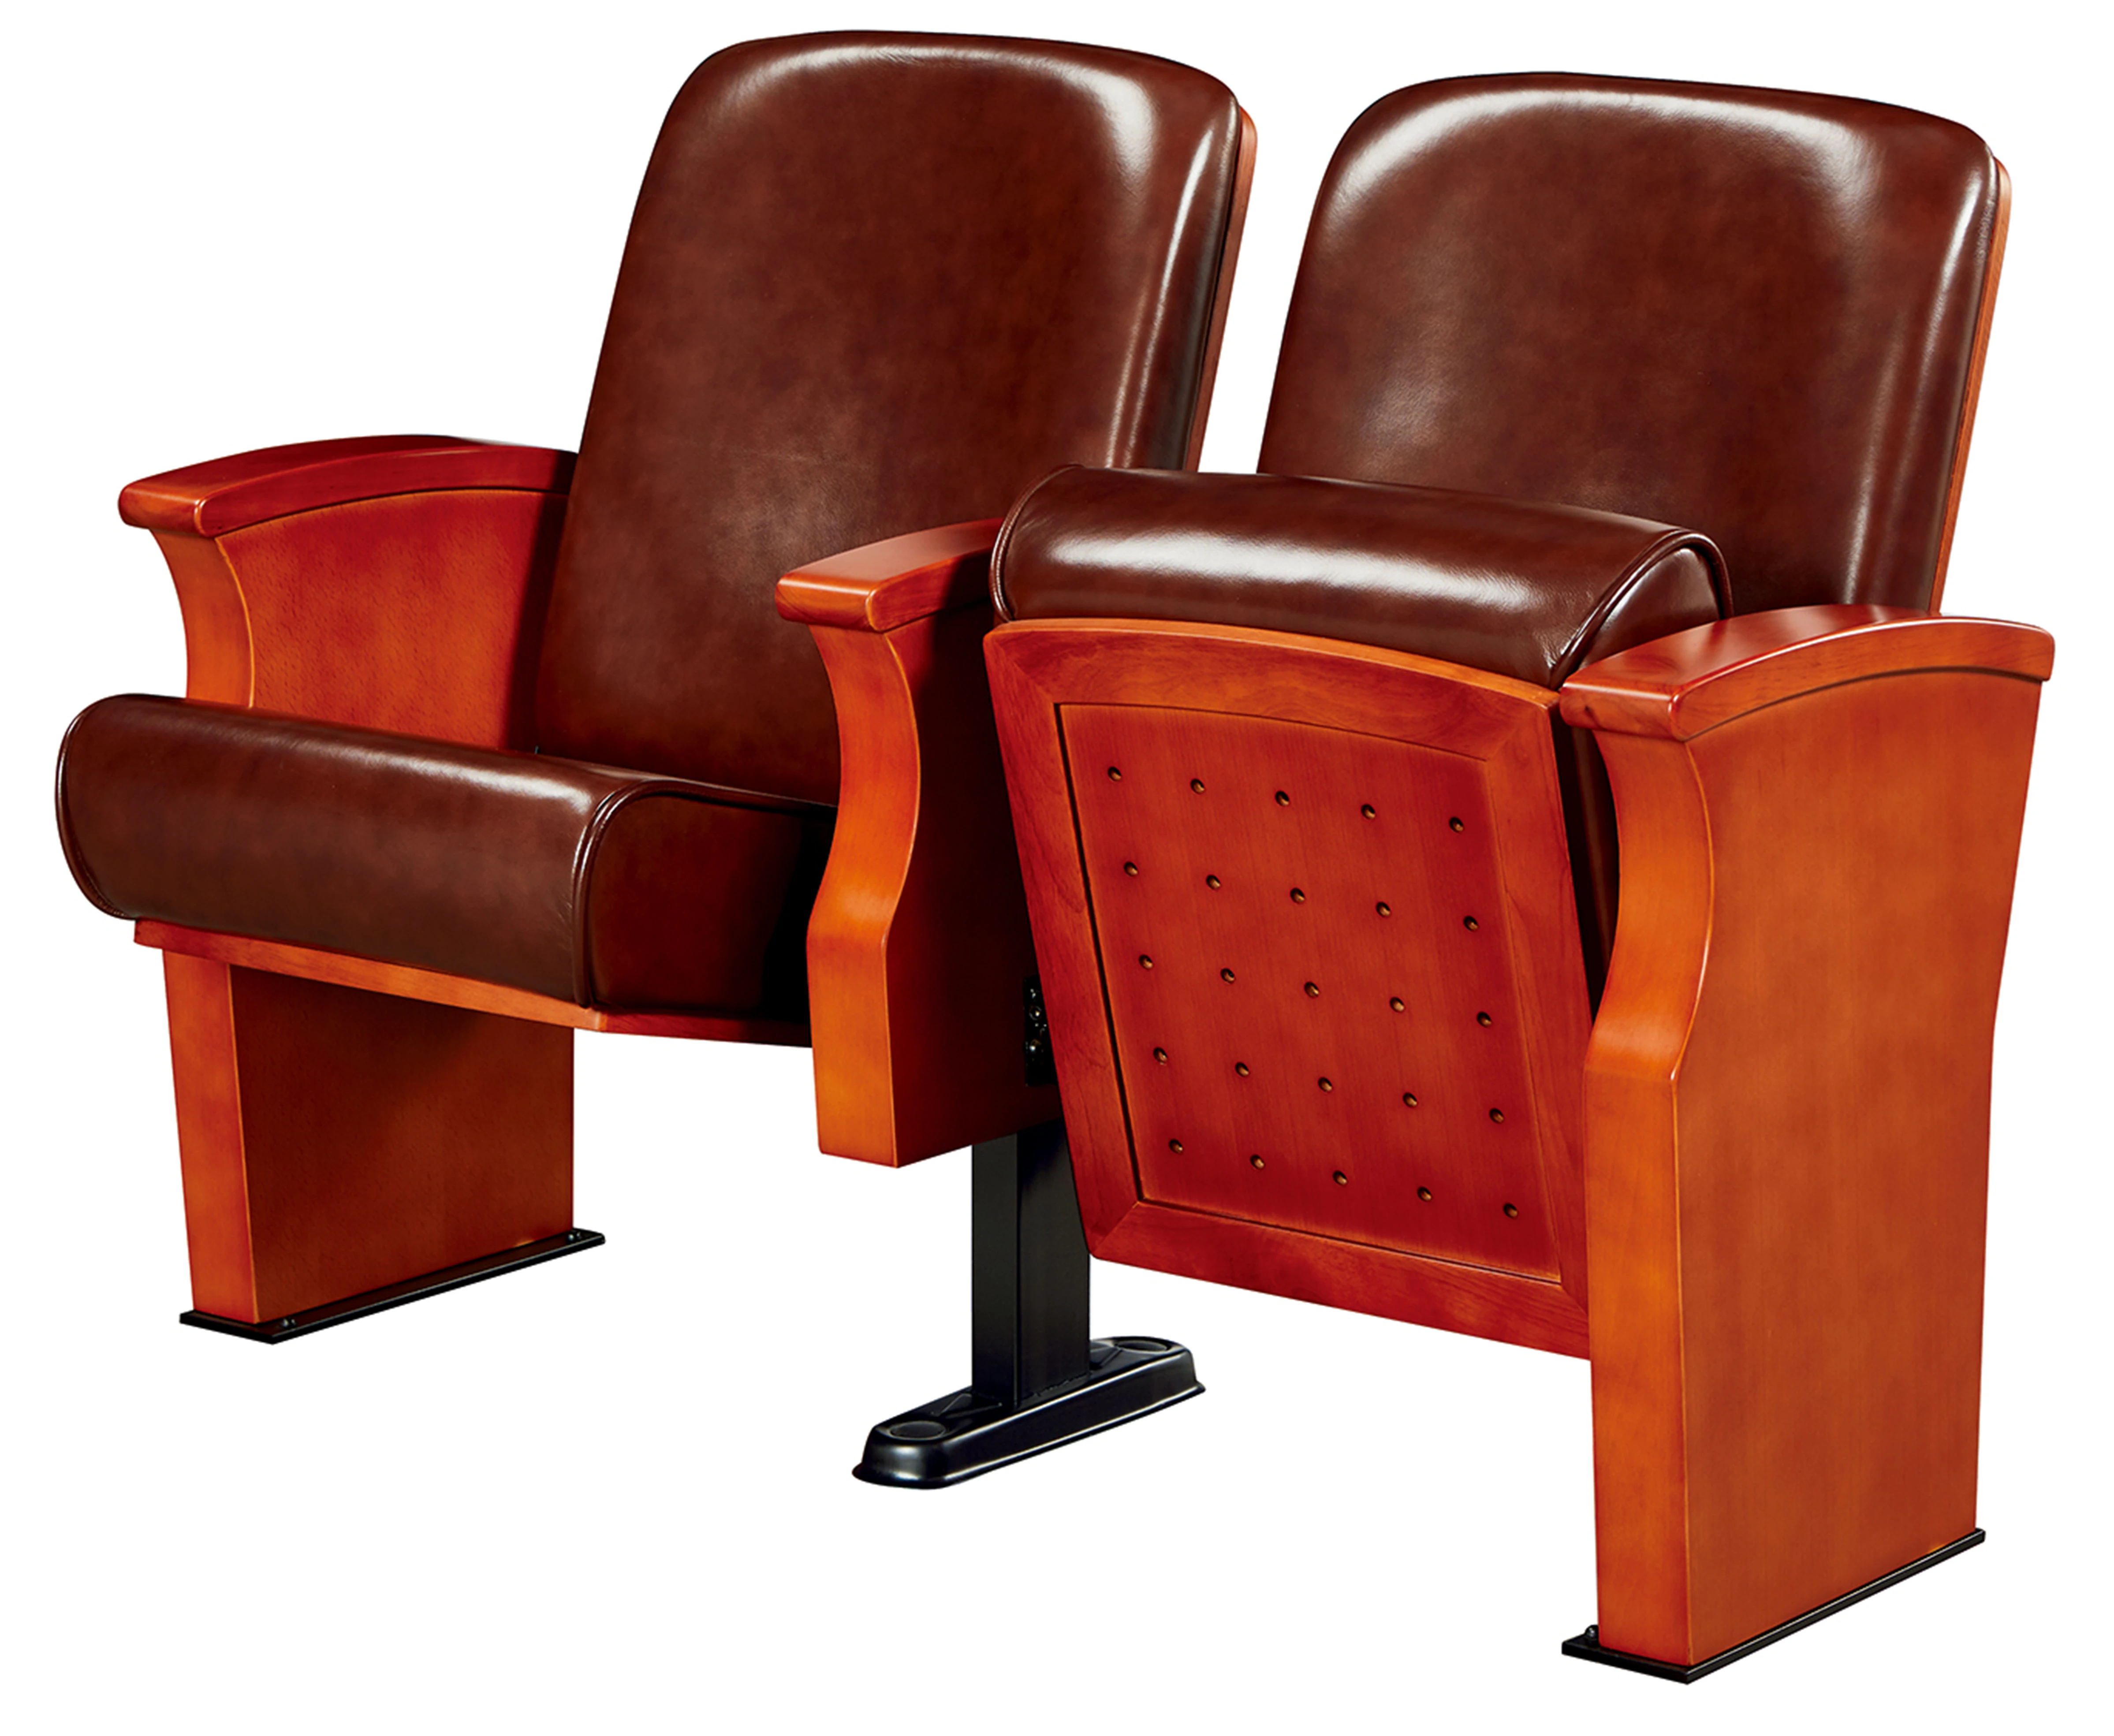 Factory Supply Solid wood Genuine Leather Theater Seat Furniture Auditorium Lecture Hall Seating Church Chair